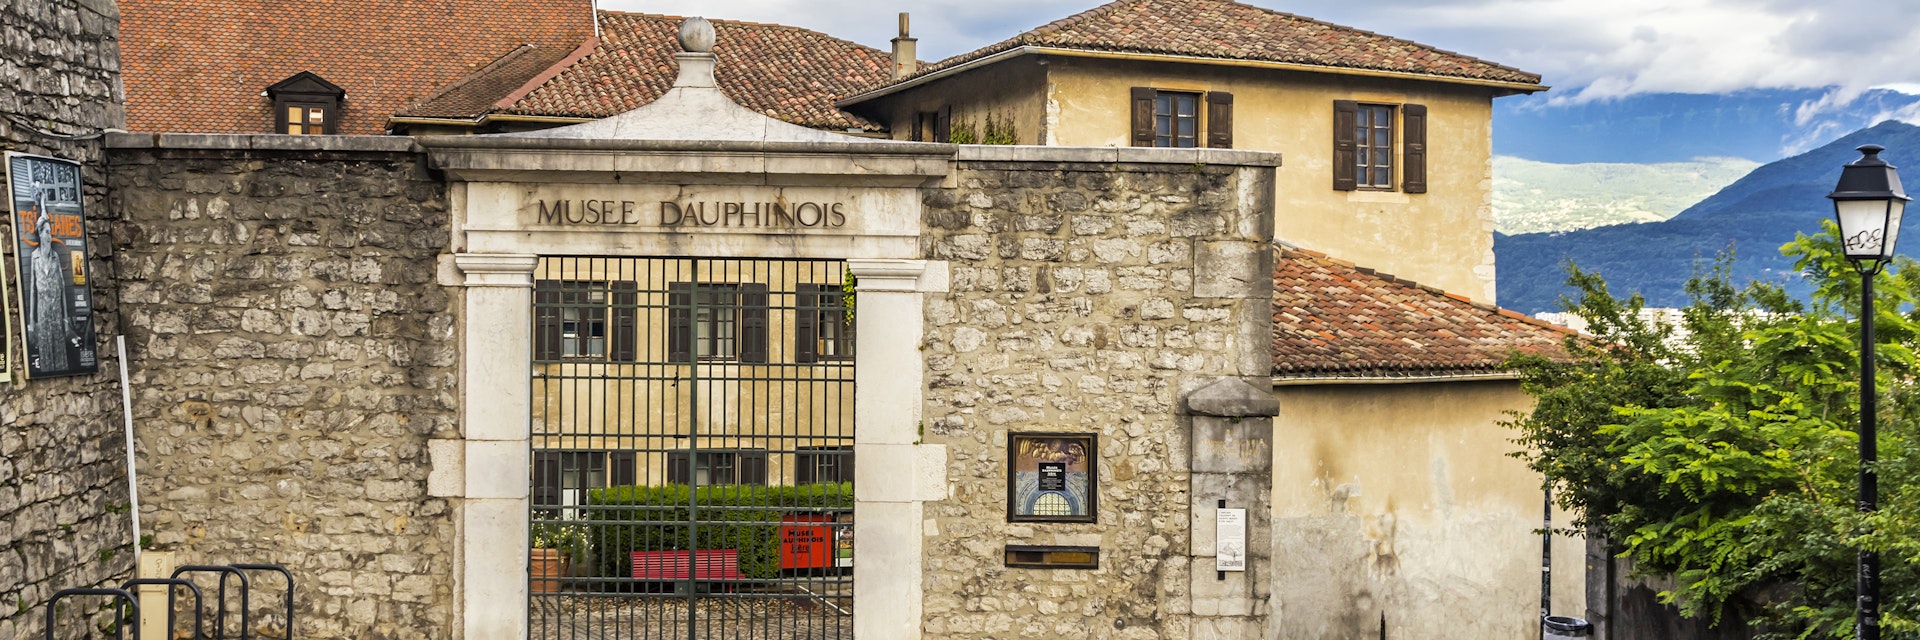 Entrance of the Dauphinois museum (Musee dauphinois) in Grenoble.